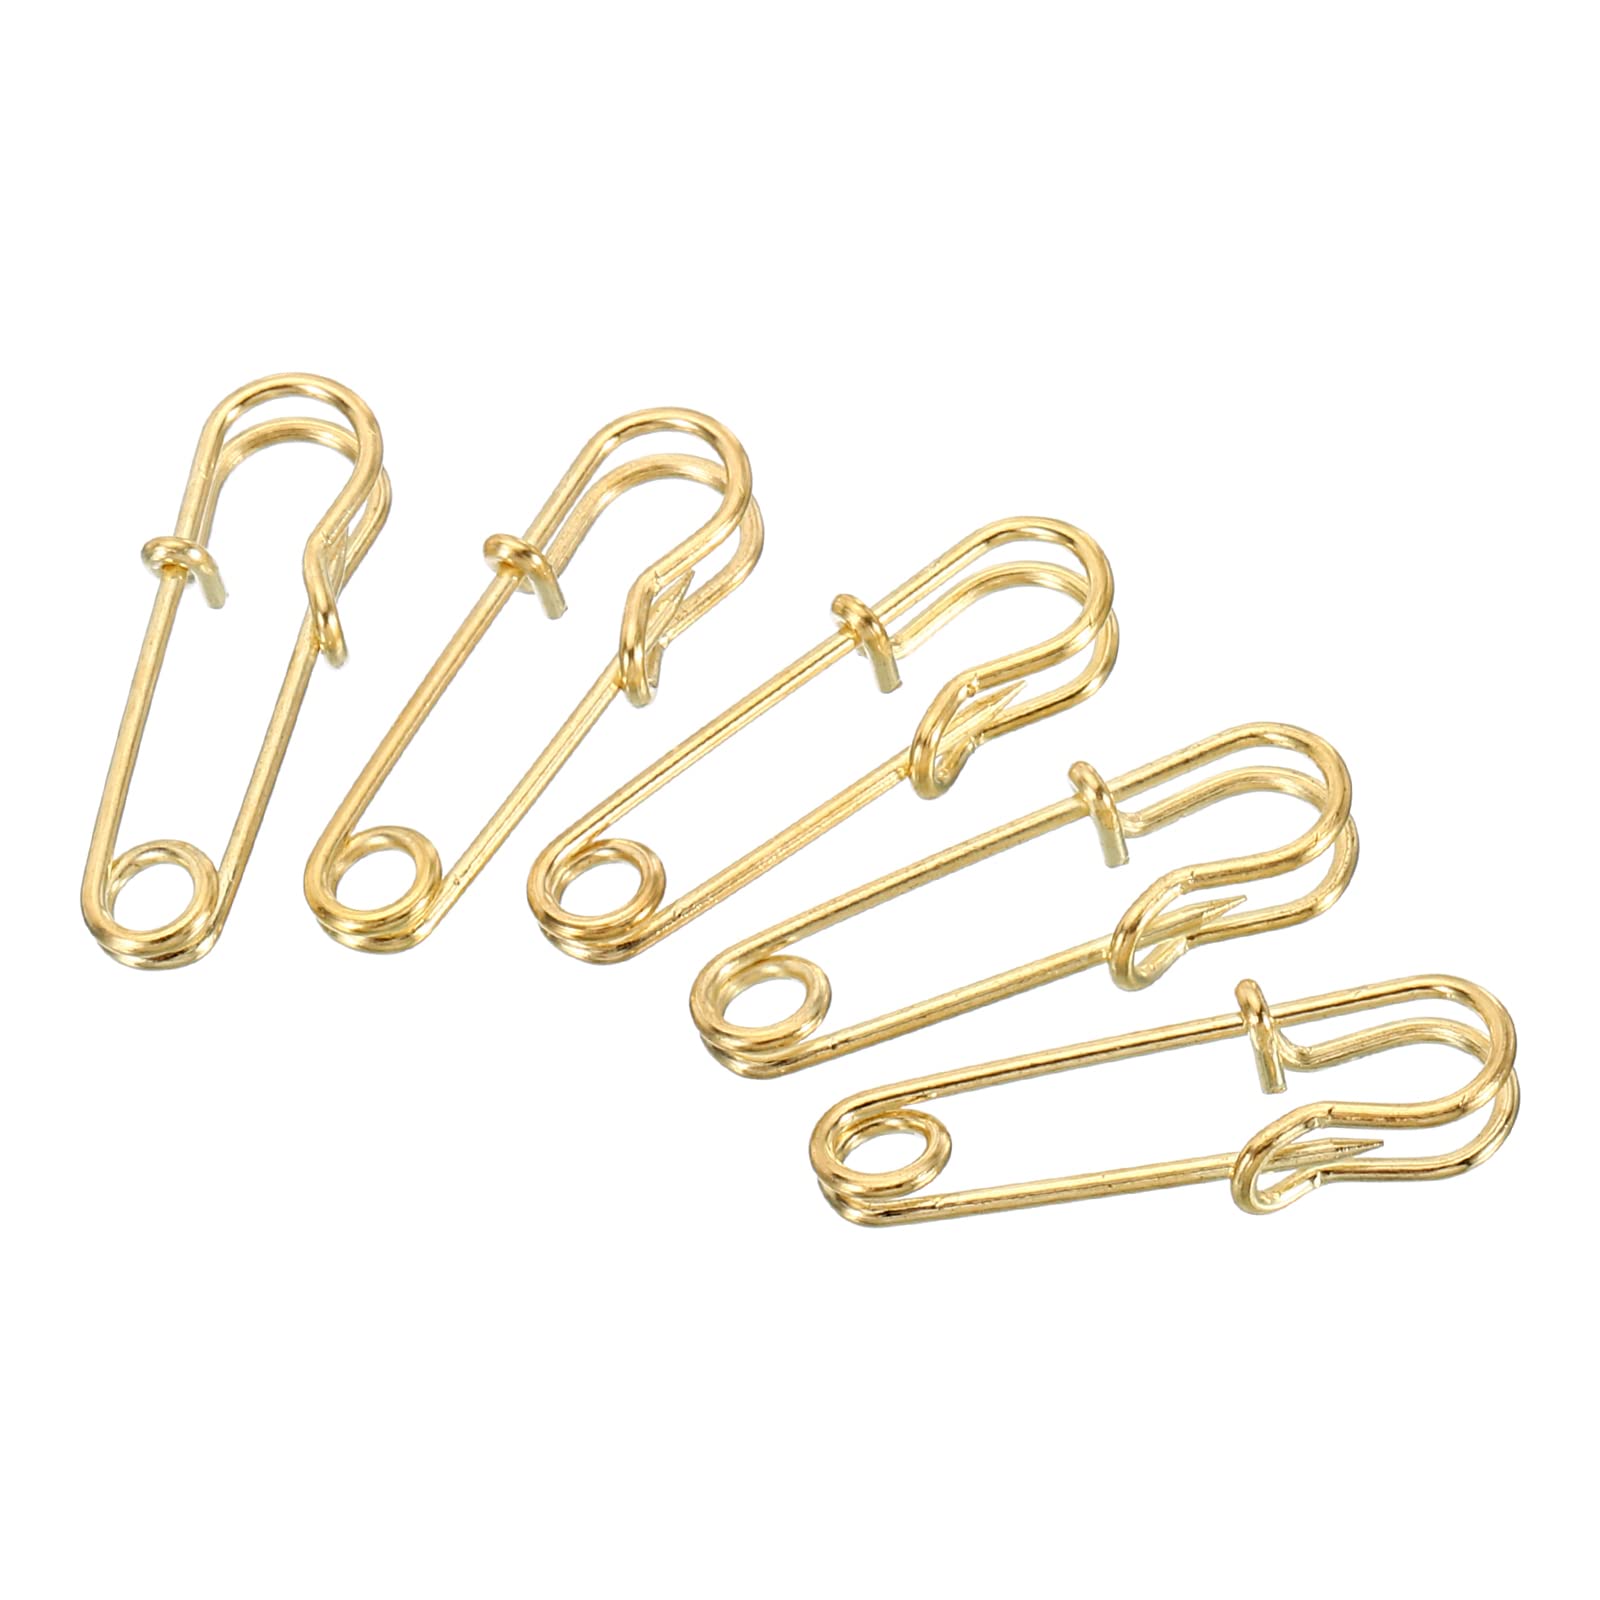 Jumbo Safety pins 85mm Large Rose Gold Safety Pins Craft Findings Metal  Brooch Safety Pins DIY Sewing Tools